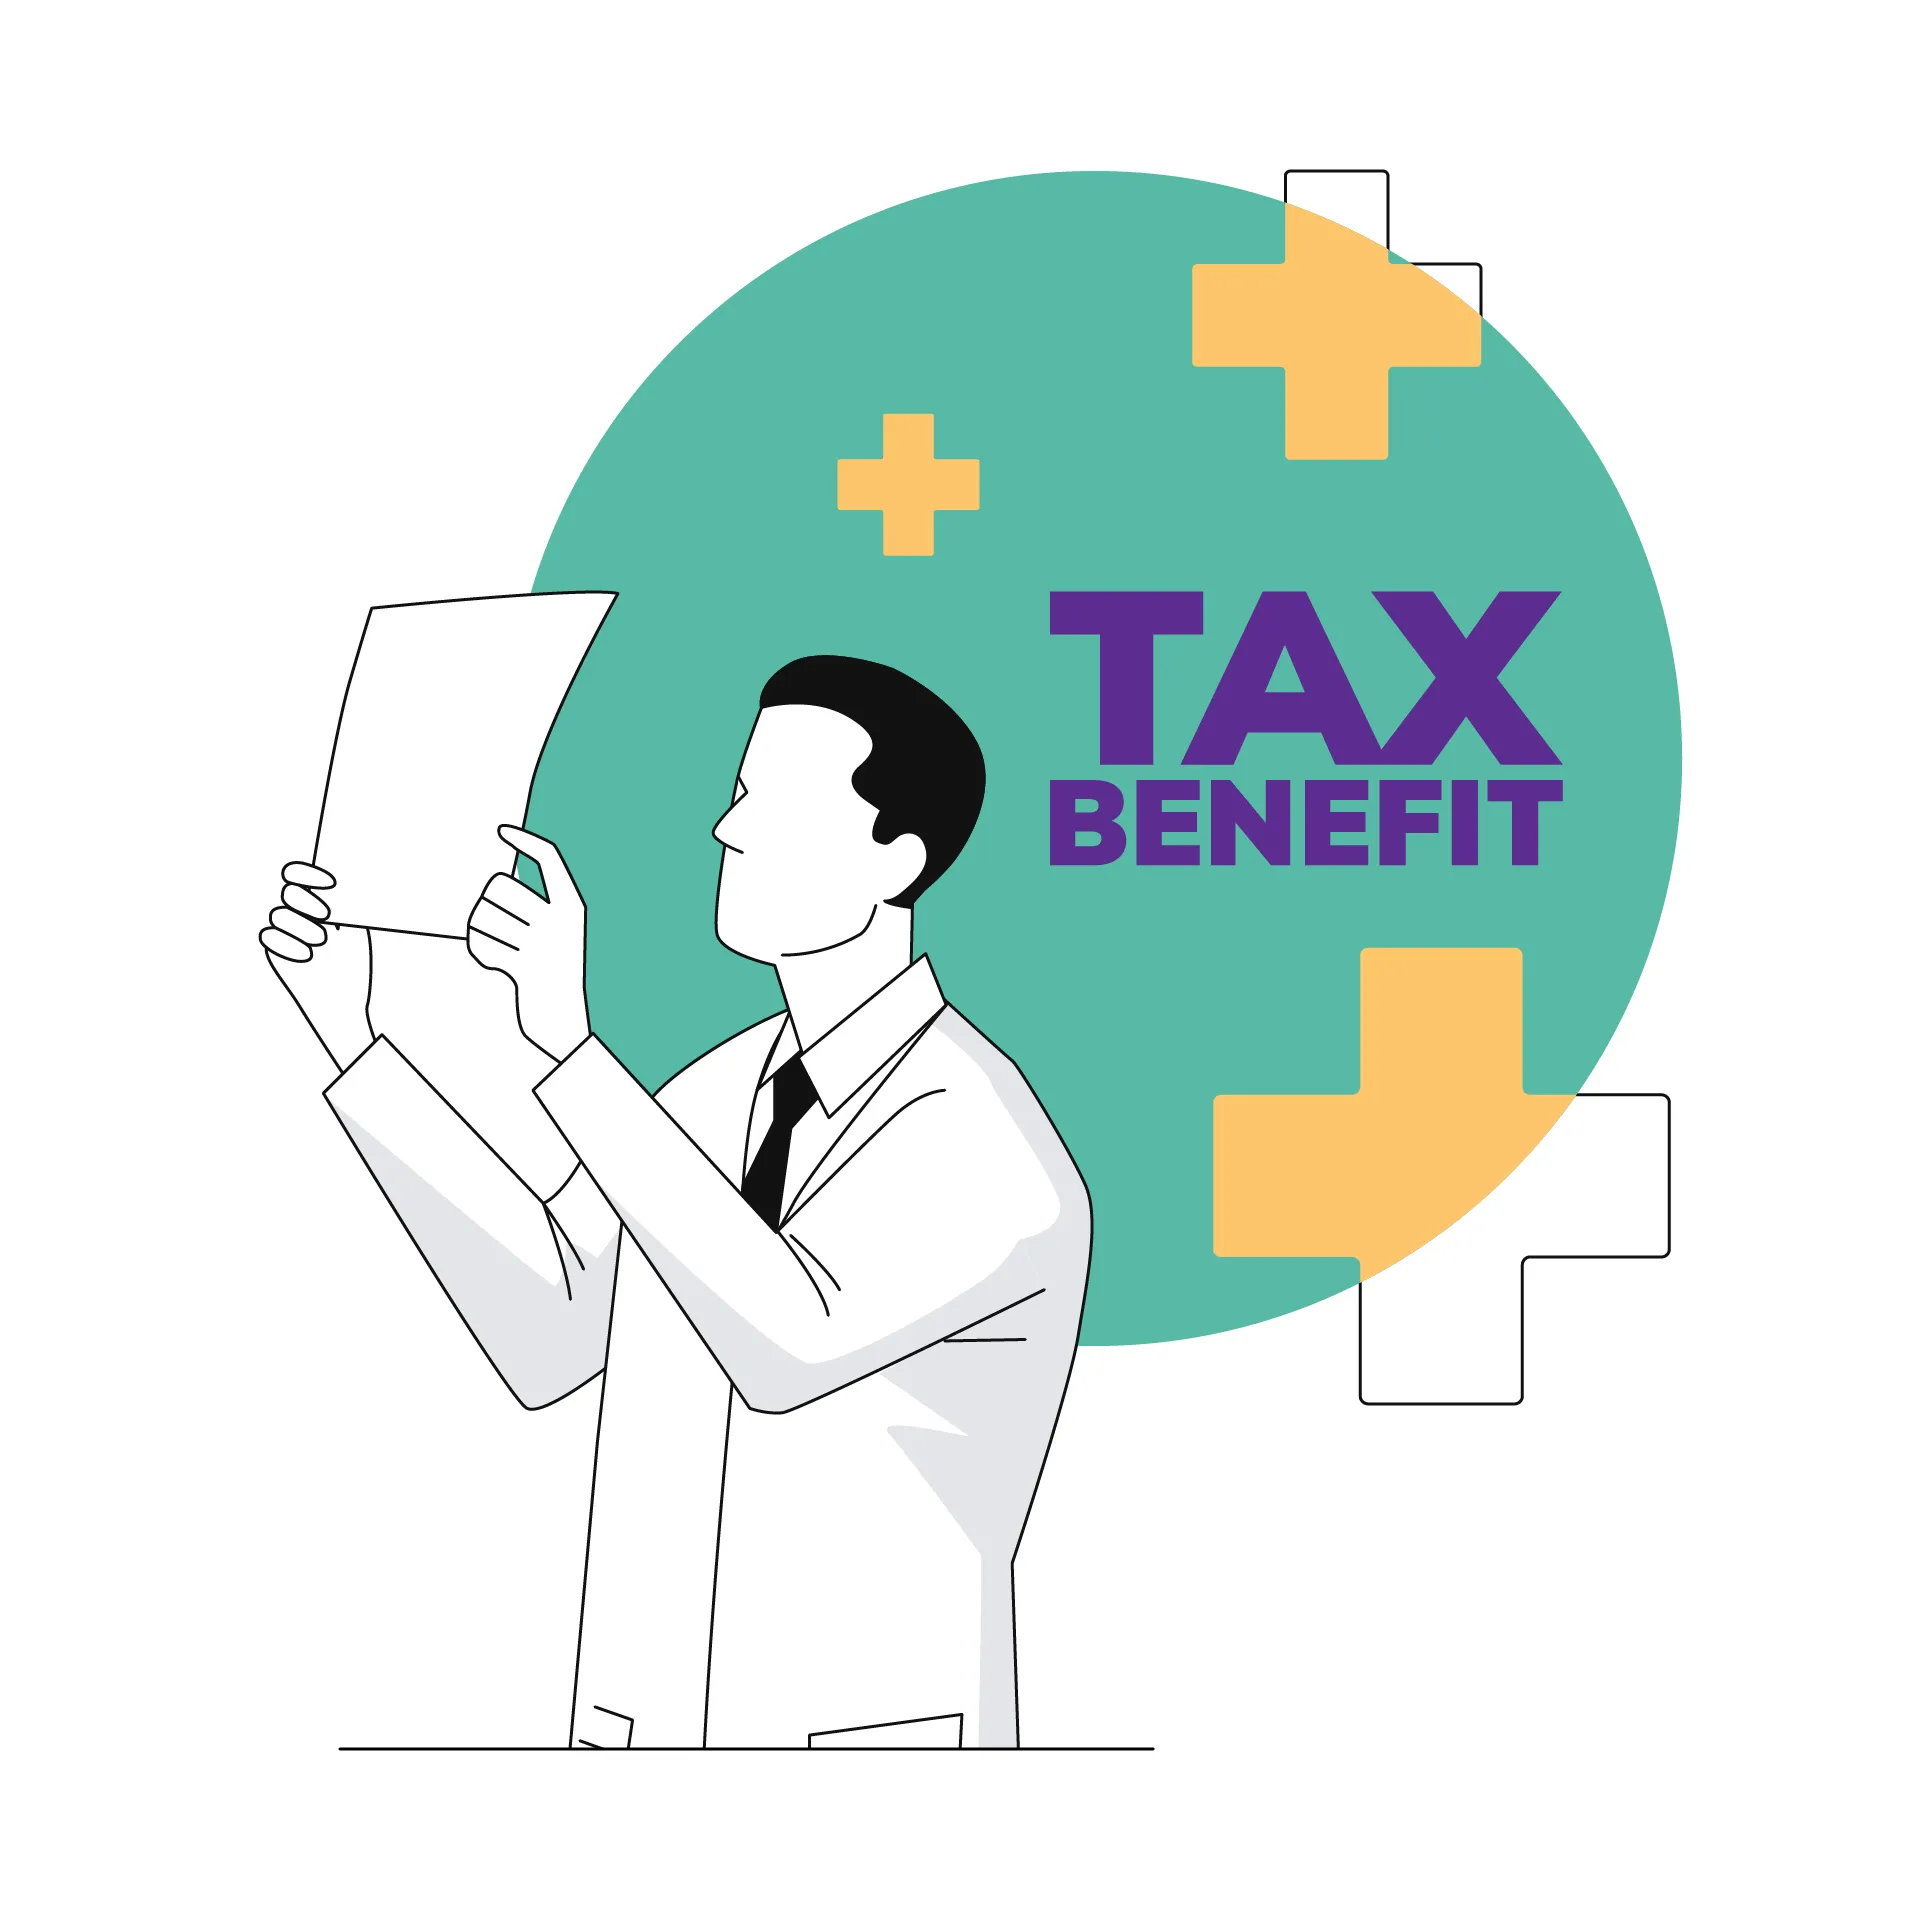 3 Tax Benefits You Can Avail - 15